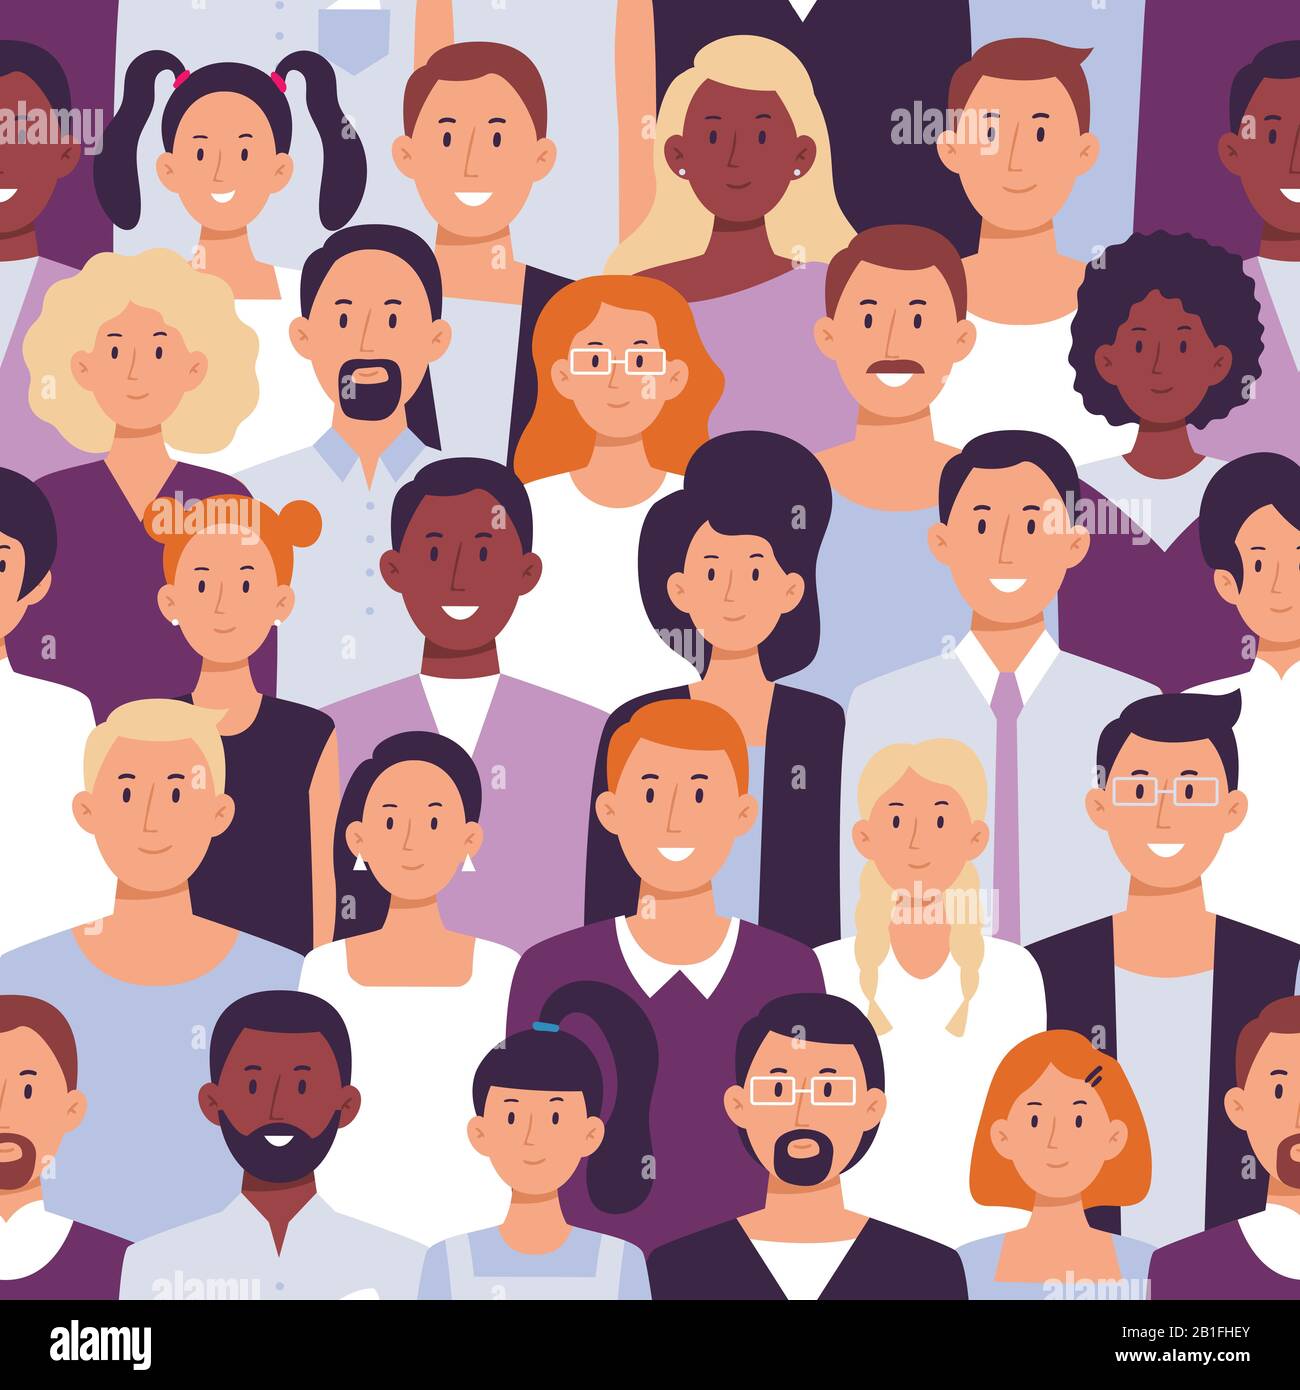 Business people crowd pattern. Office employees, workers team portrait and colleagues standing together seamless vector illustration Stock Vector